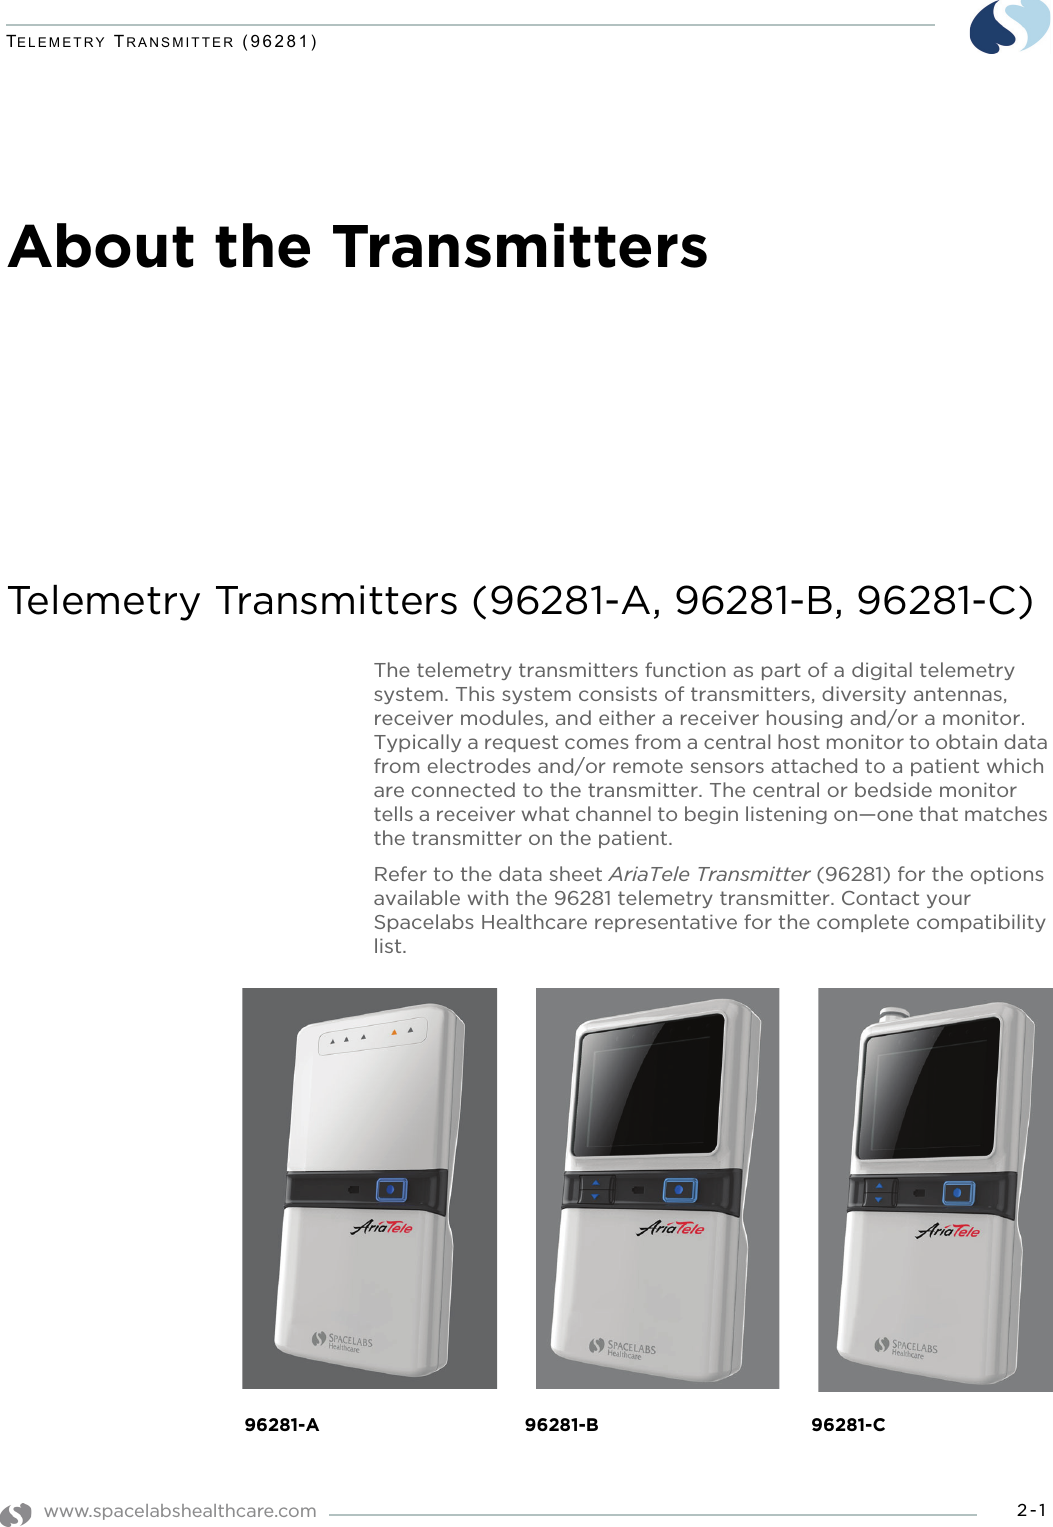 www.spacelabshealthcare.com 2-1TELEMETRY TRANSMITTER (96281)About the TransmittersTelemetry Transmitters (96281-A, 96281-B, 96281-C)The telemetry transmitters function as part of a digital telemetry system. This system consists of transmitters, diversity antennas, receiver modules, and either a receiver housing and/or a monitor. Typically a request comes from a central host monitor to obtain data from electrodes and/or remote sensors attached to a patient which are connected to the transmitter. The central or bedside monitor tells a receiver what channel to begin listening on—one that matches the transmitter on the patient.Refer to the data sheet AriaTele Transmitter (96281) for the options available with the 96281 telemetry transmitter. Contact your Spacelabs Healthcare representative for the complete compatibility list.96281-A 96281-B 96281-C